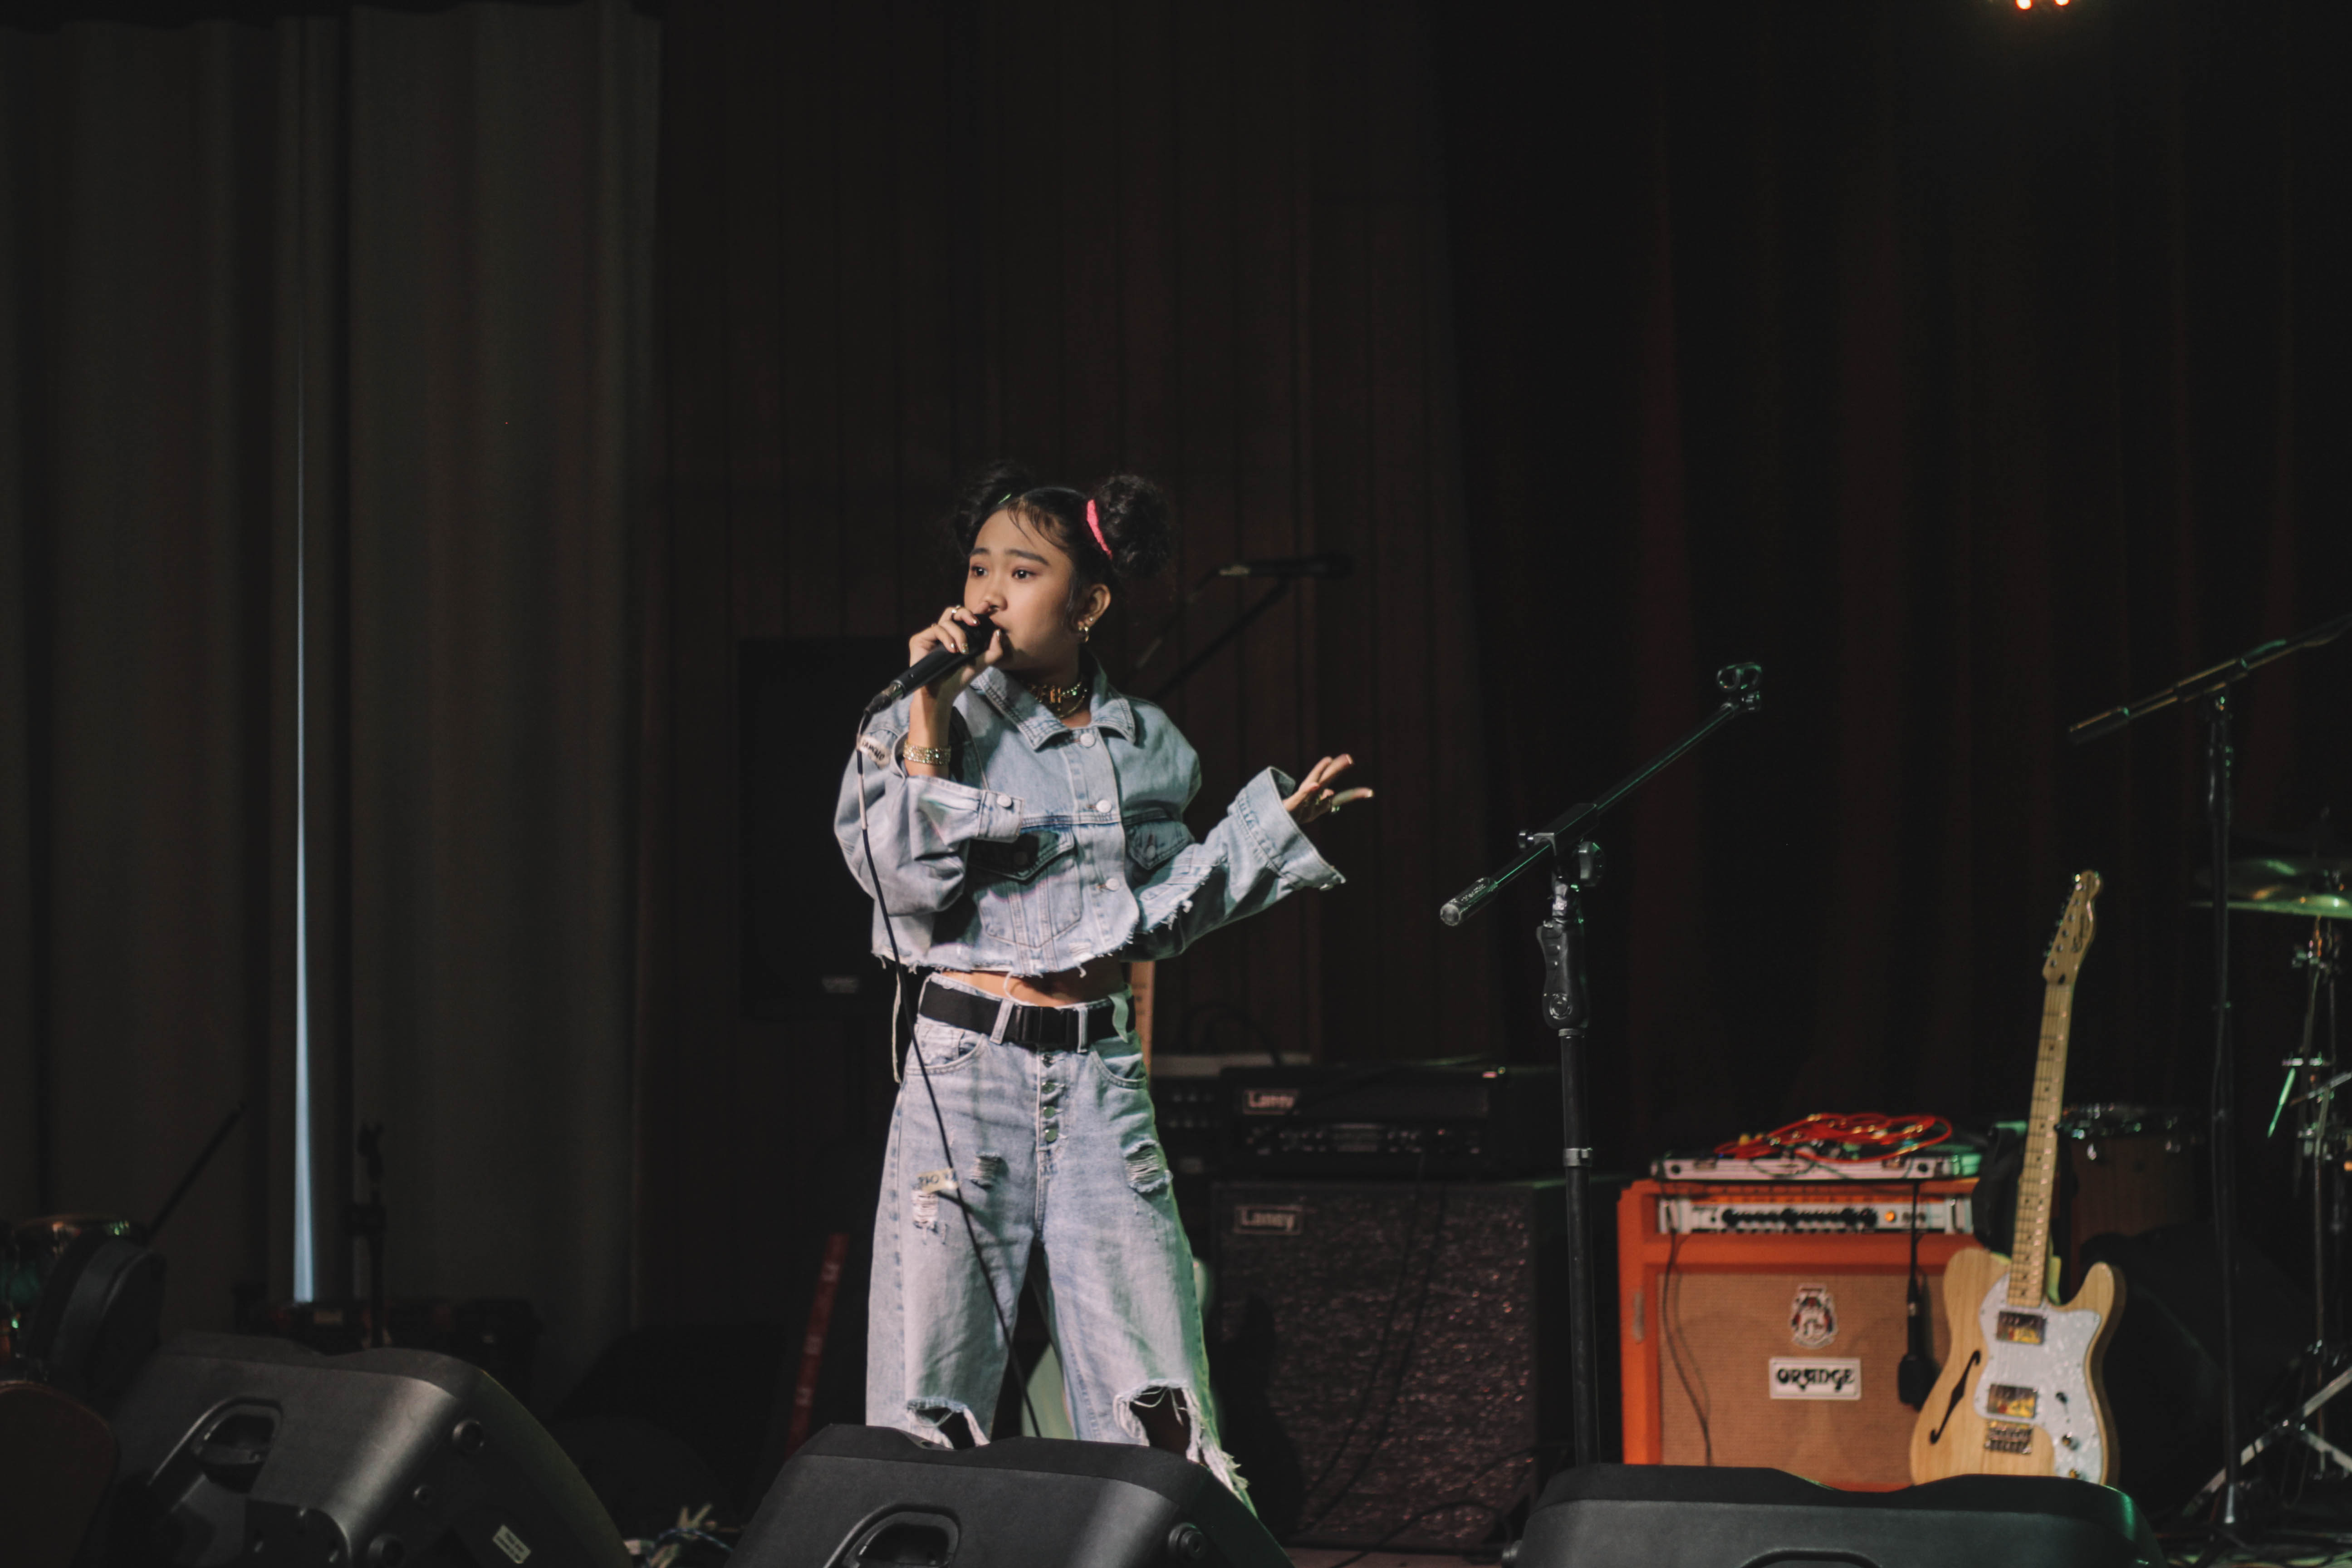 NEW TALENT. At 12 years old, Alex is one of the youngest known rappers in the country. Photo by Trixy Gosadan/Sony Music Philippines 